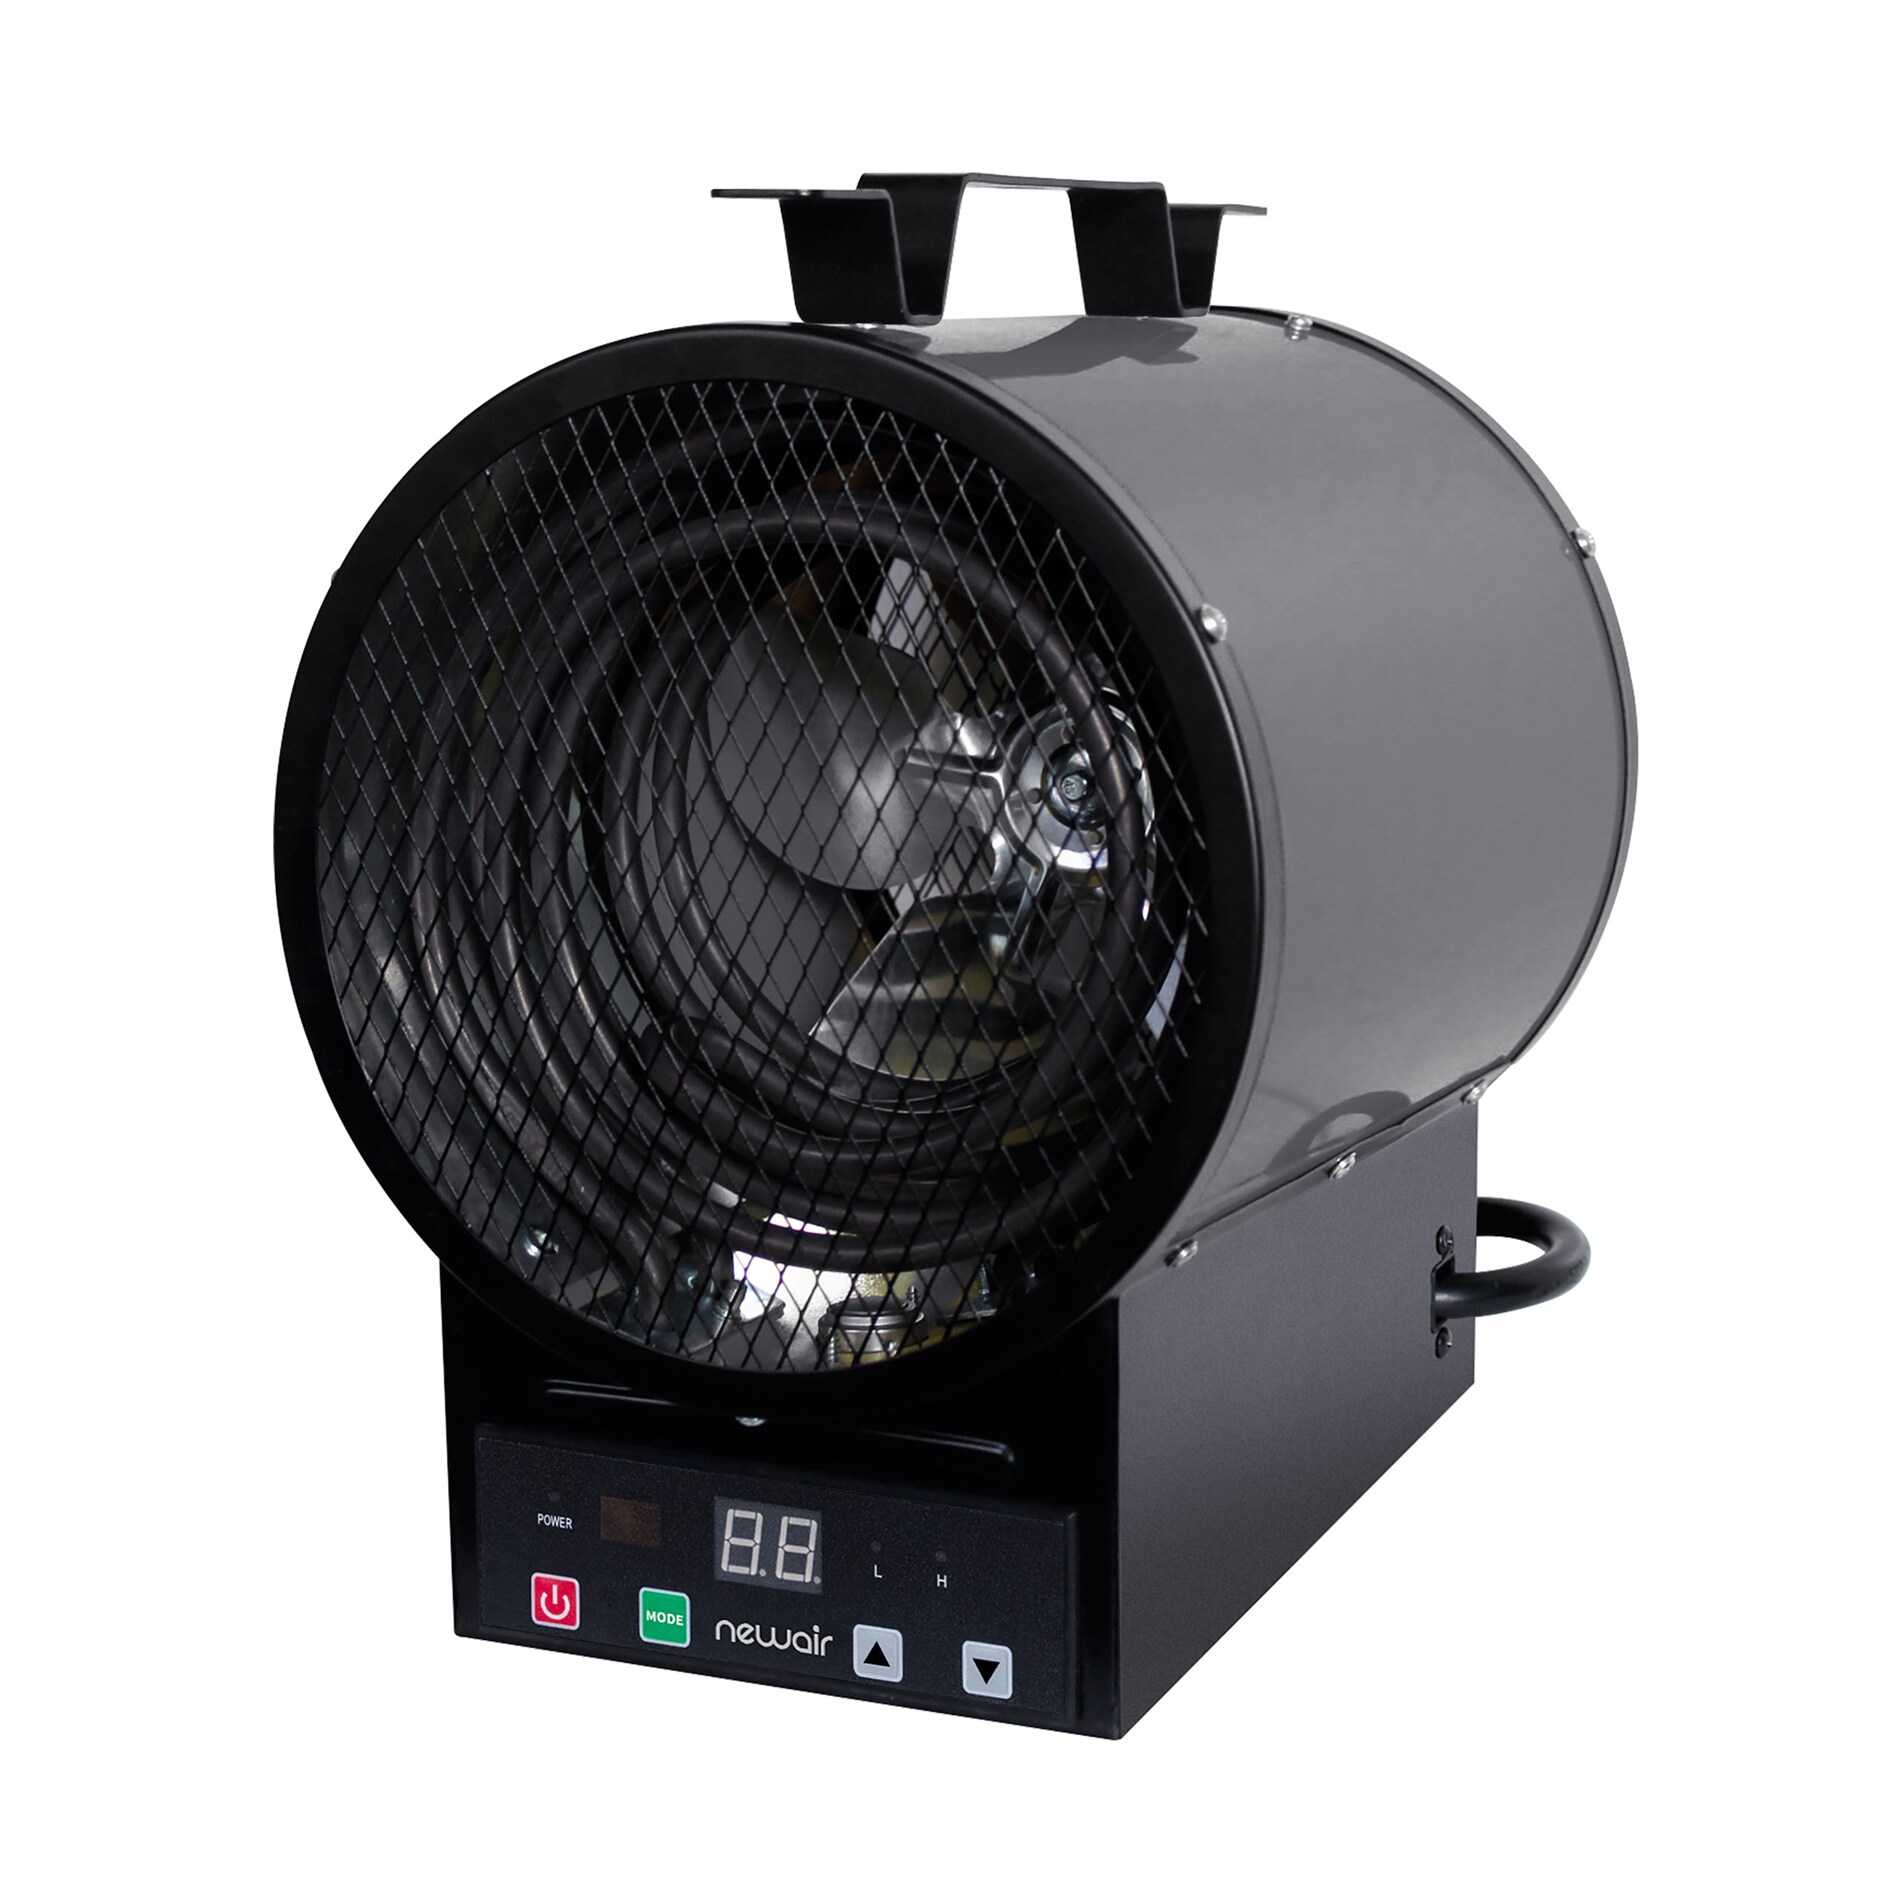 NewAir Up to 4800-Watt Infrared Portable Electric Garage Heater with ...